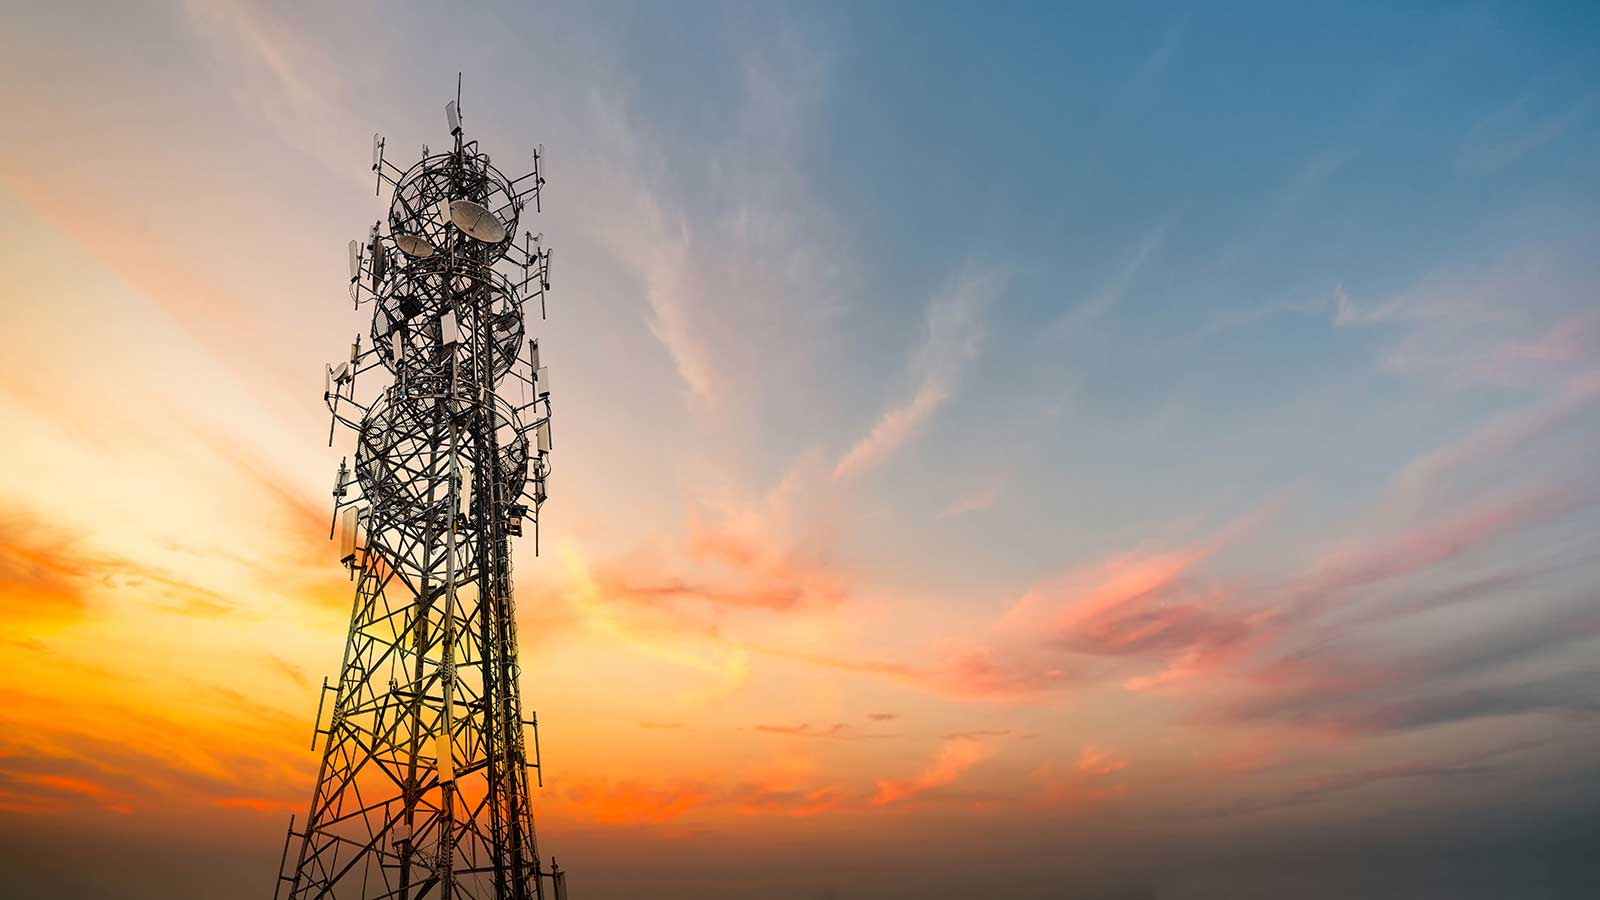 Communications tower at sunset representing Electrical Engineering programs at Clarkson University